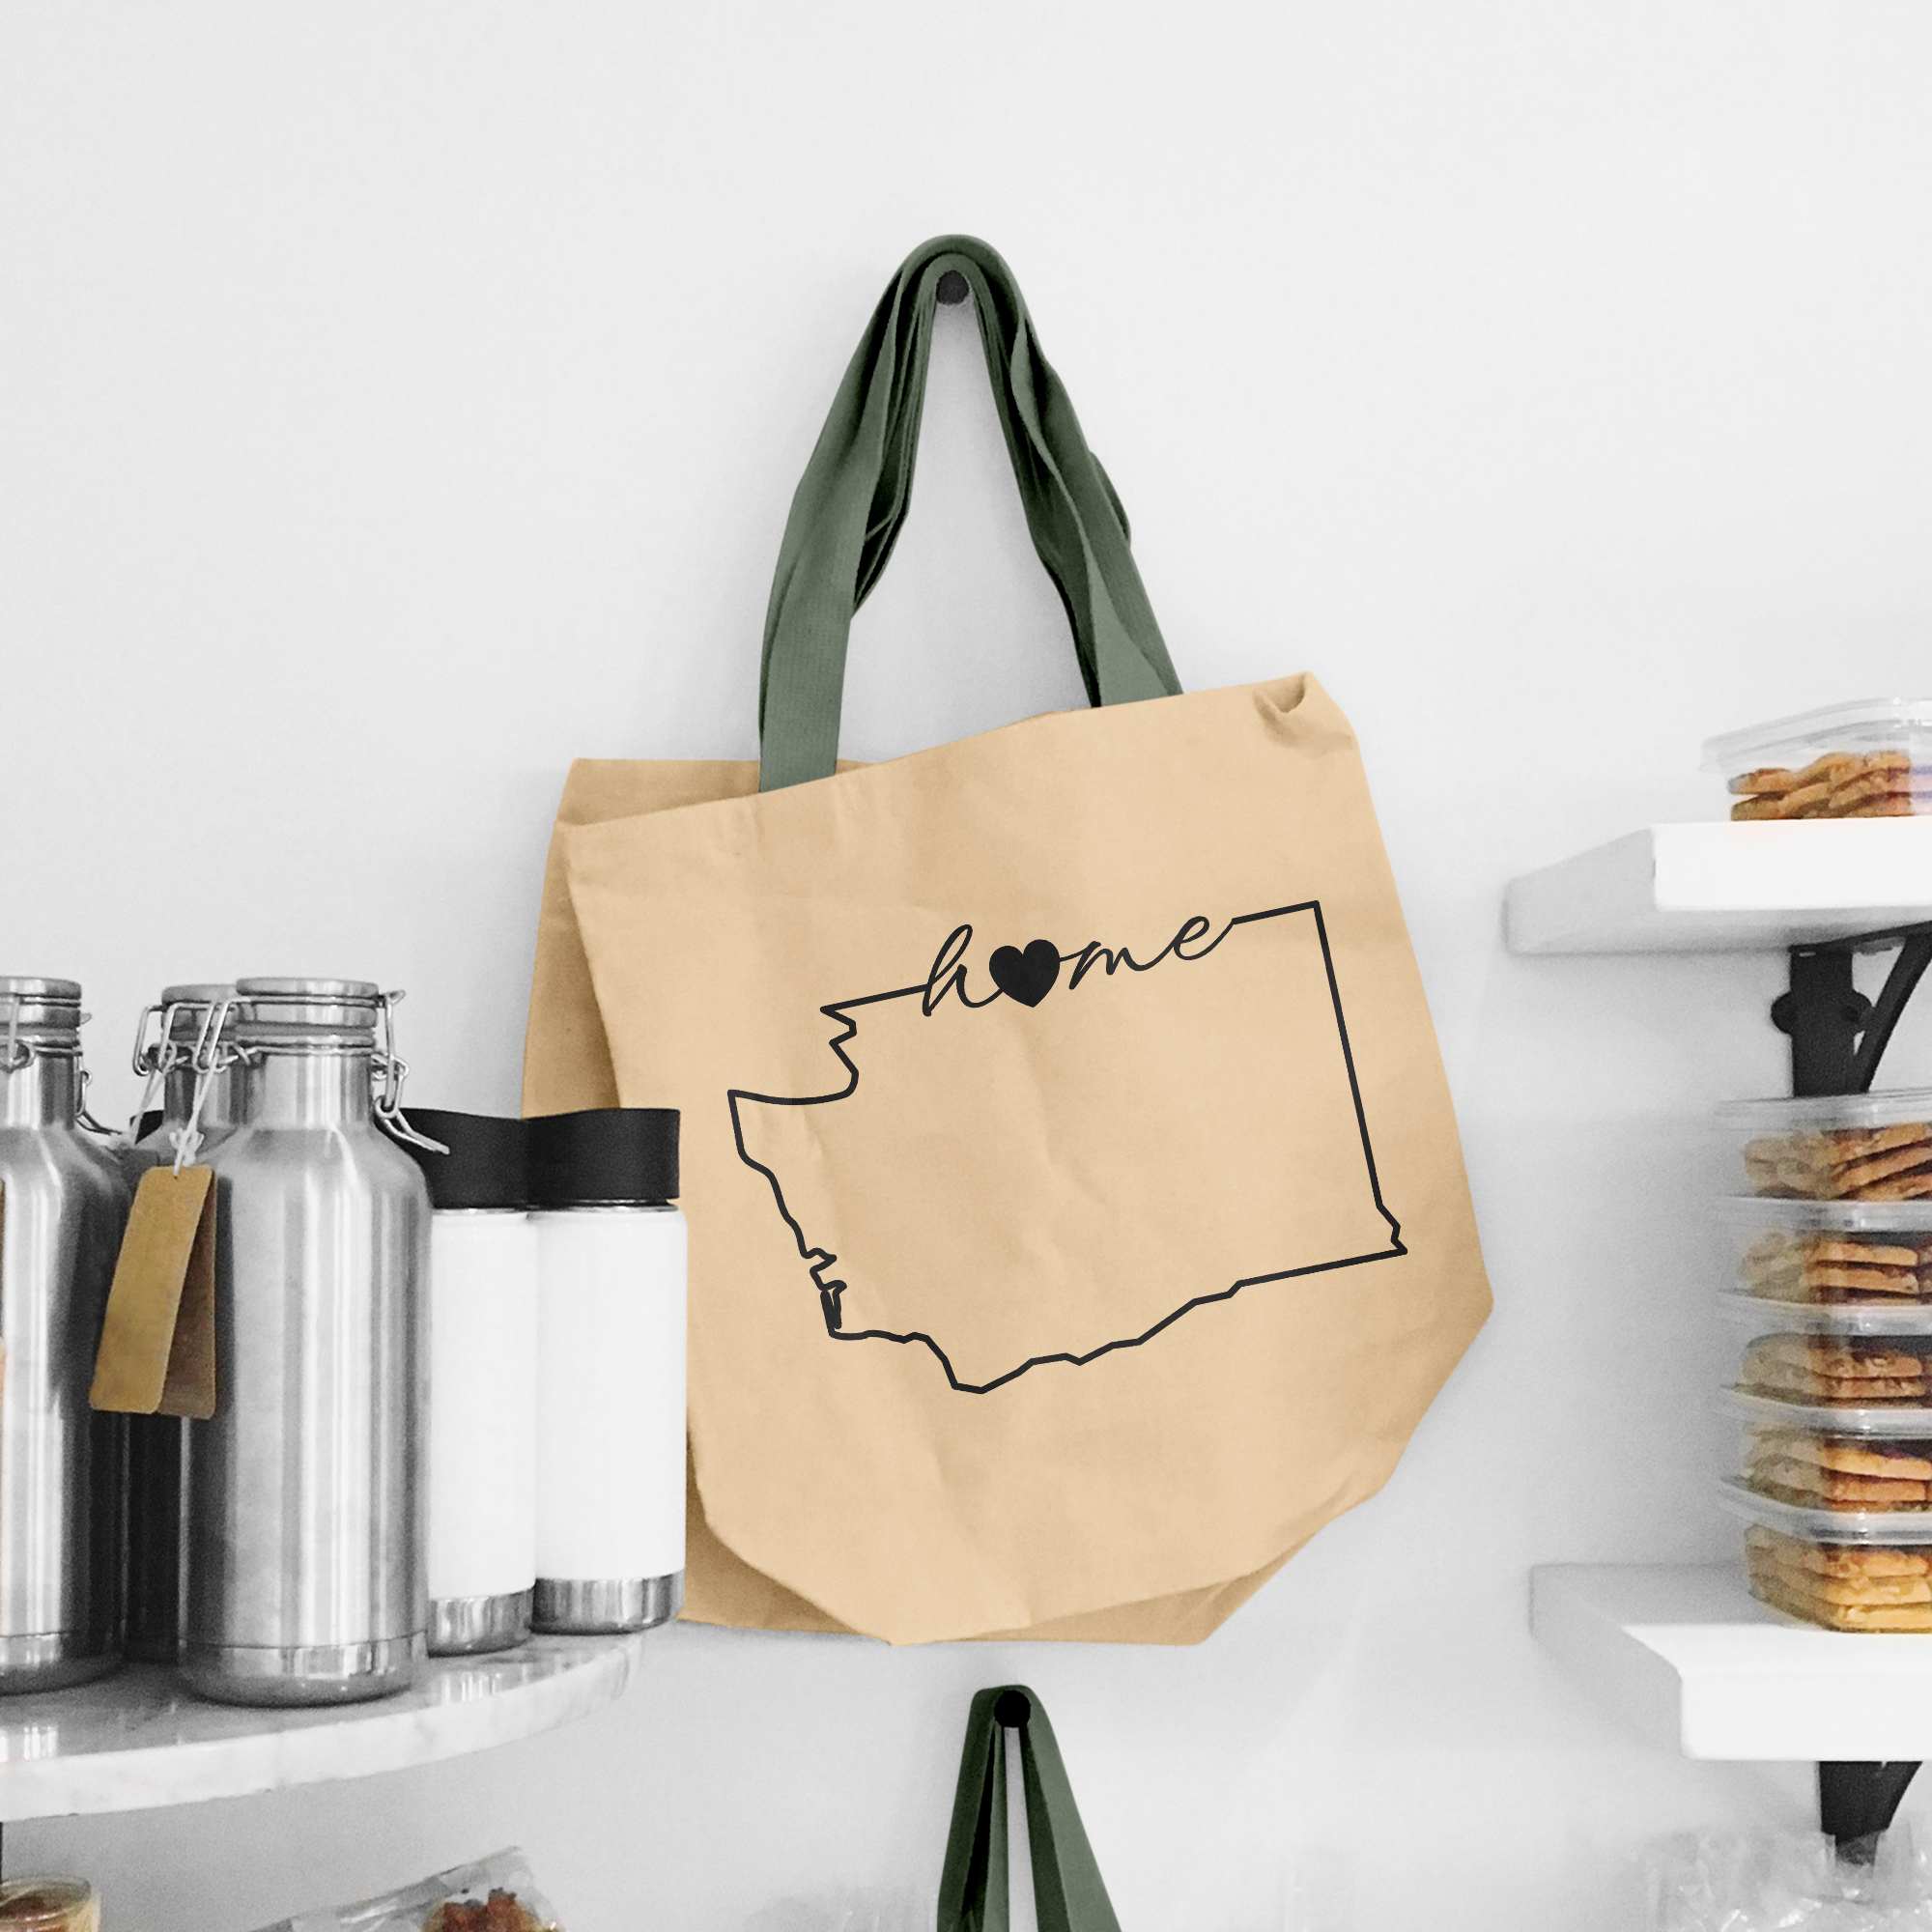 Black illustration of map of Washington on the beige shopping bag with dirty green handle.